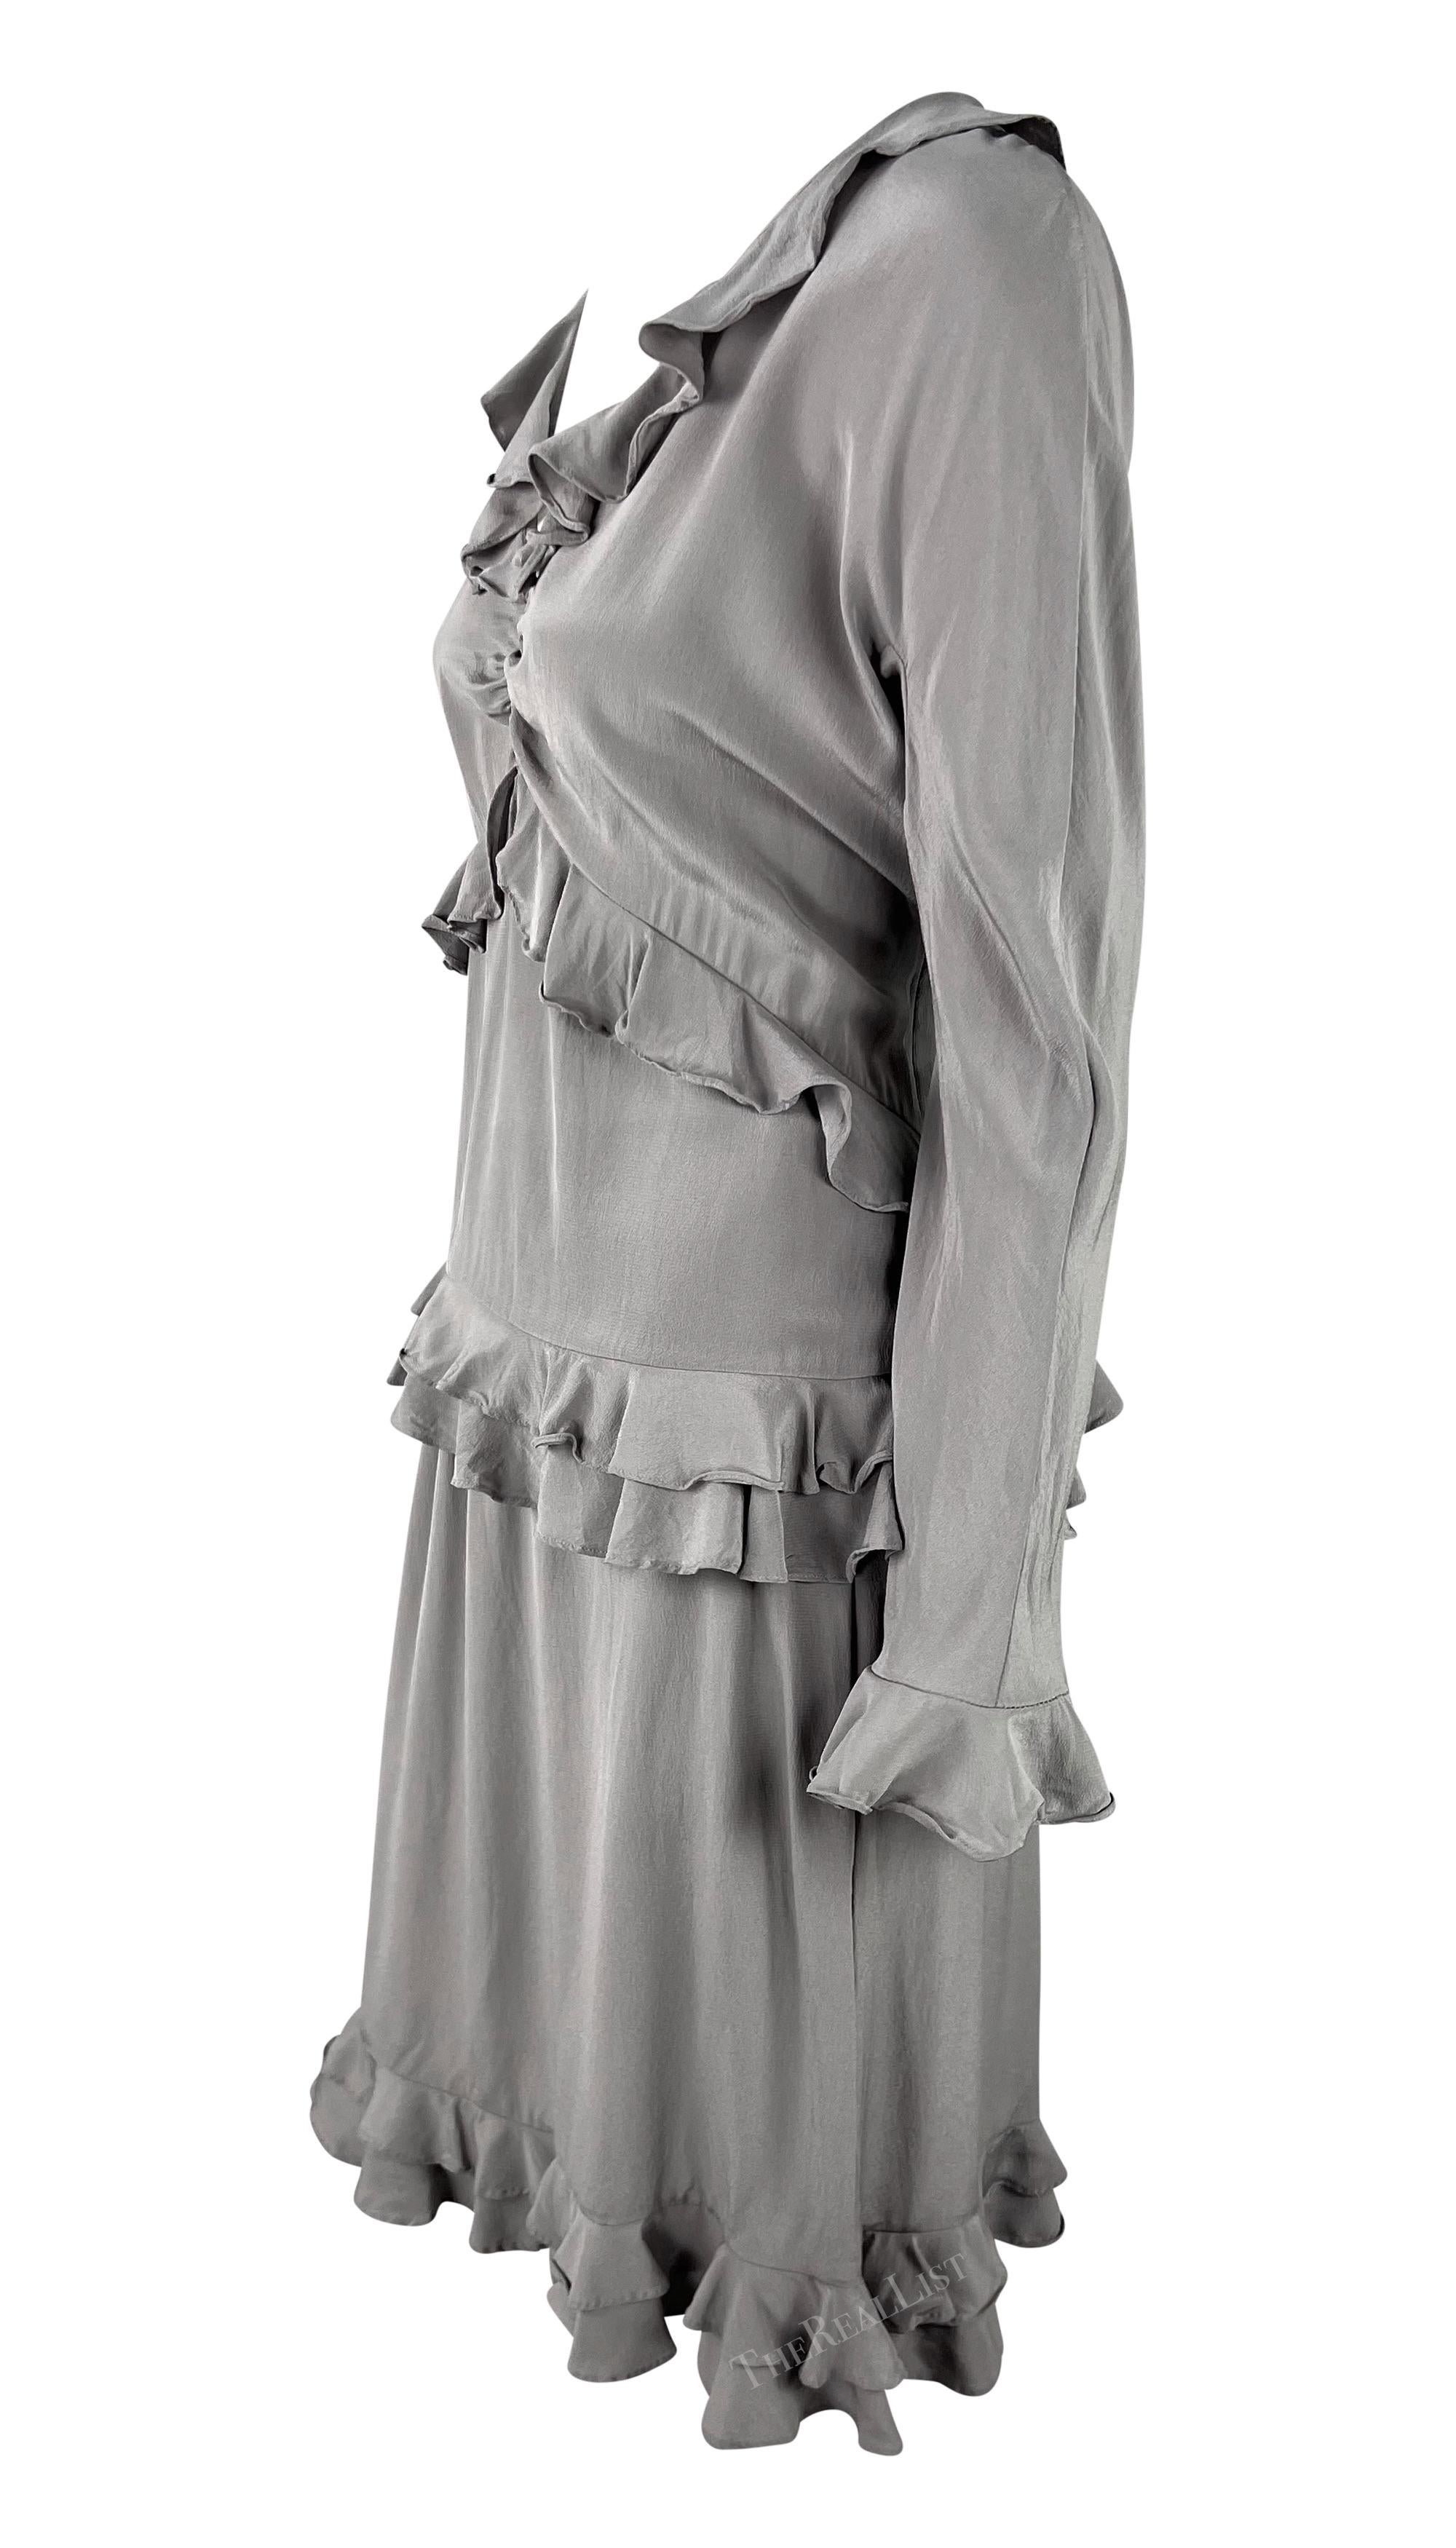 Women's S/S 1999 Gucci by Tom Ford Ruffled Grey Silk Long Sleeve Top Skirt Set For Sale